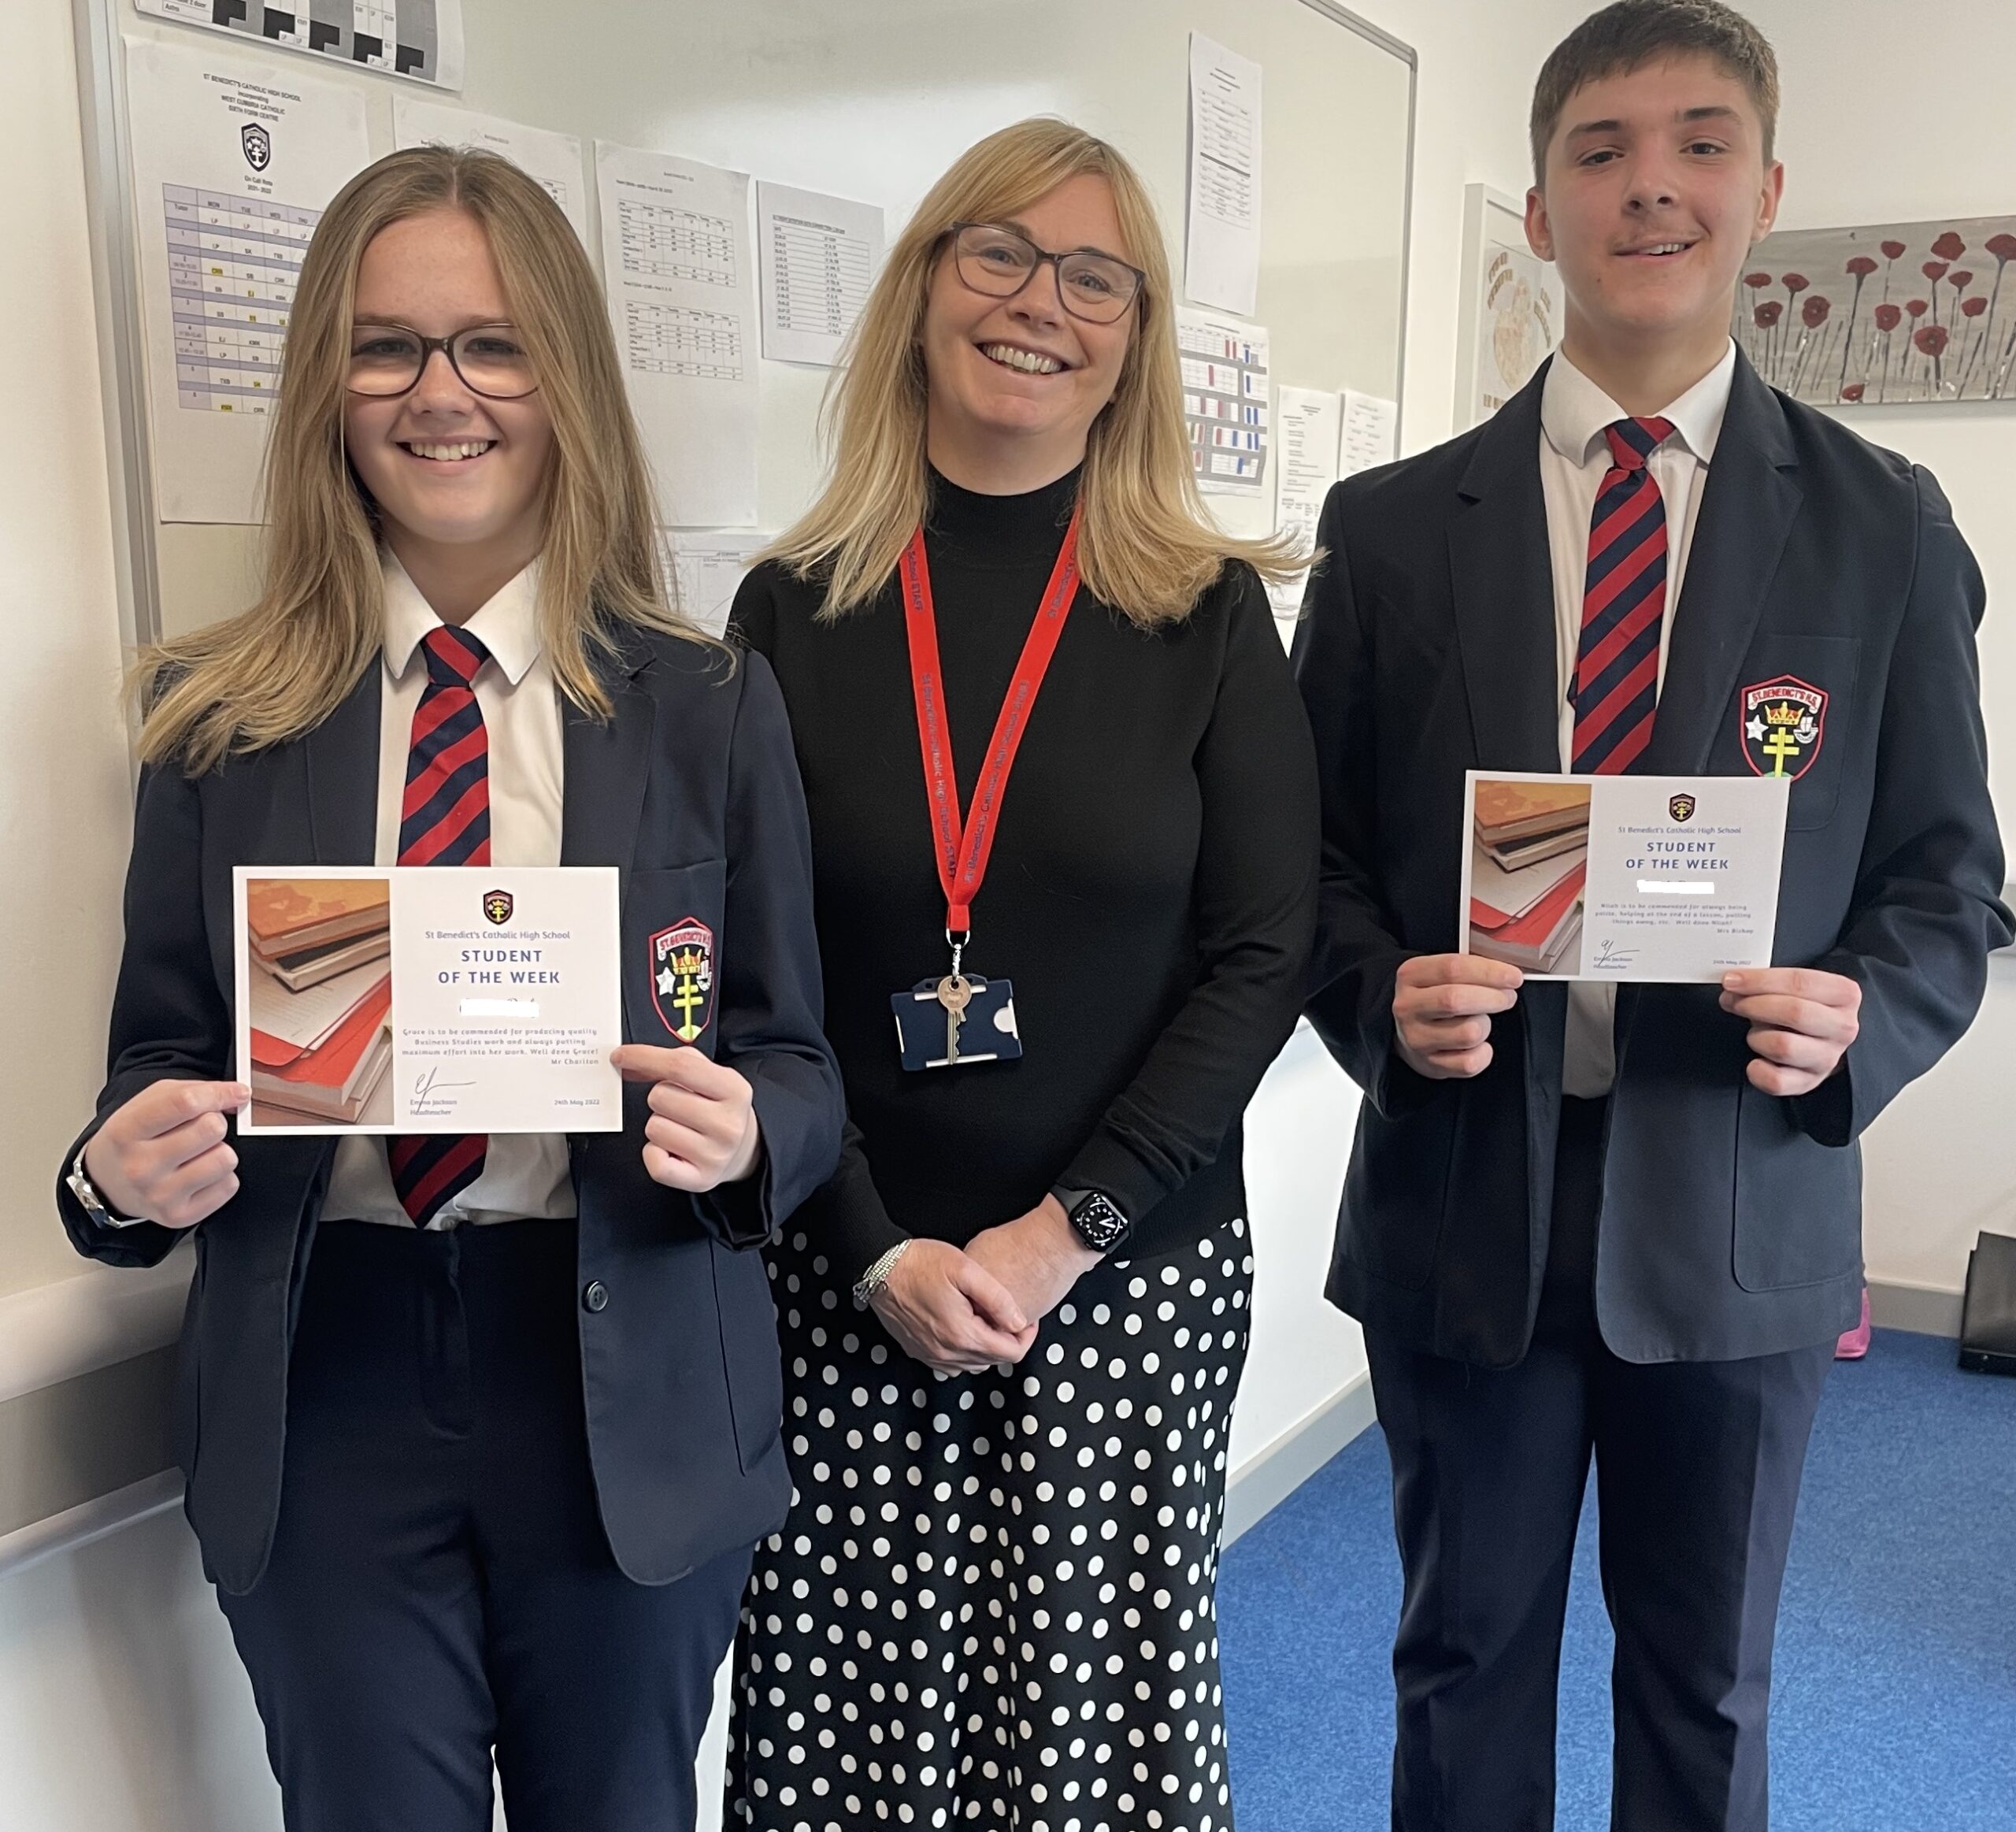 Student of the Week – 24th May